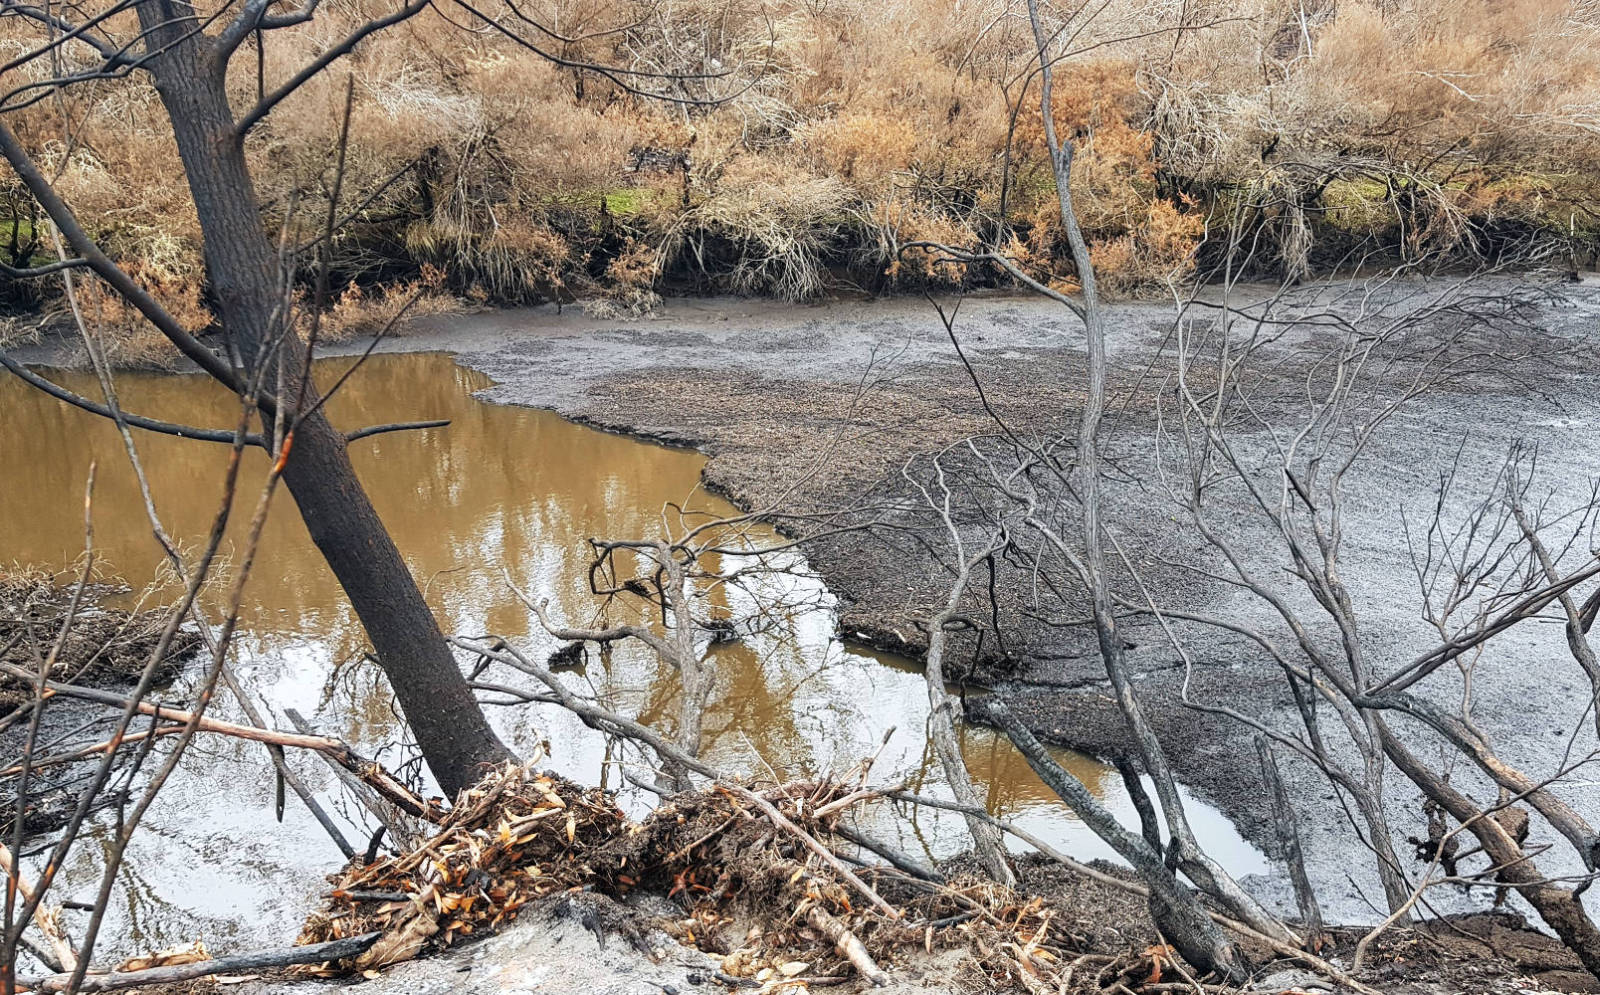 This section of the Upper Murrumbidgee has endured a thick flow of ash which has turned the water black. Photo credit: Antia Brademann.